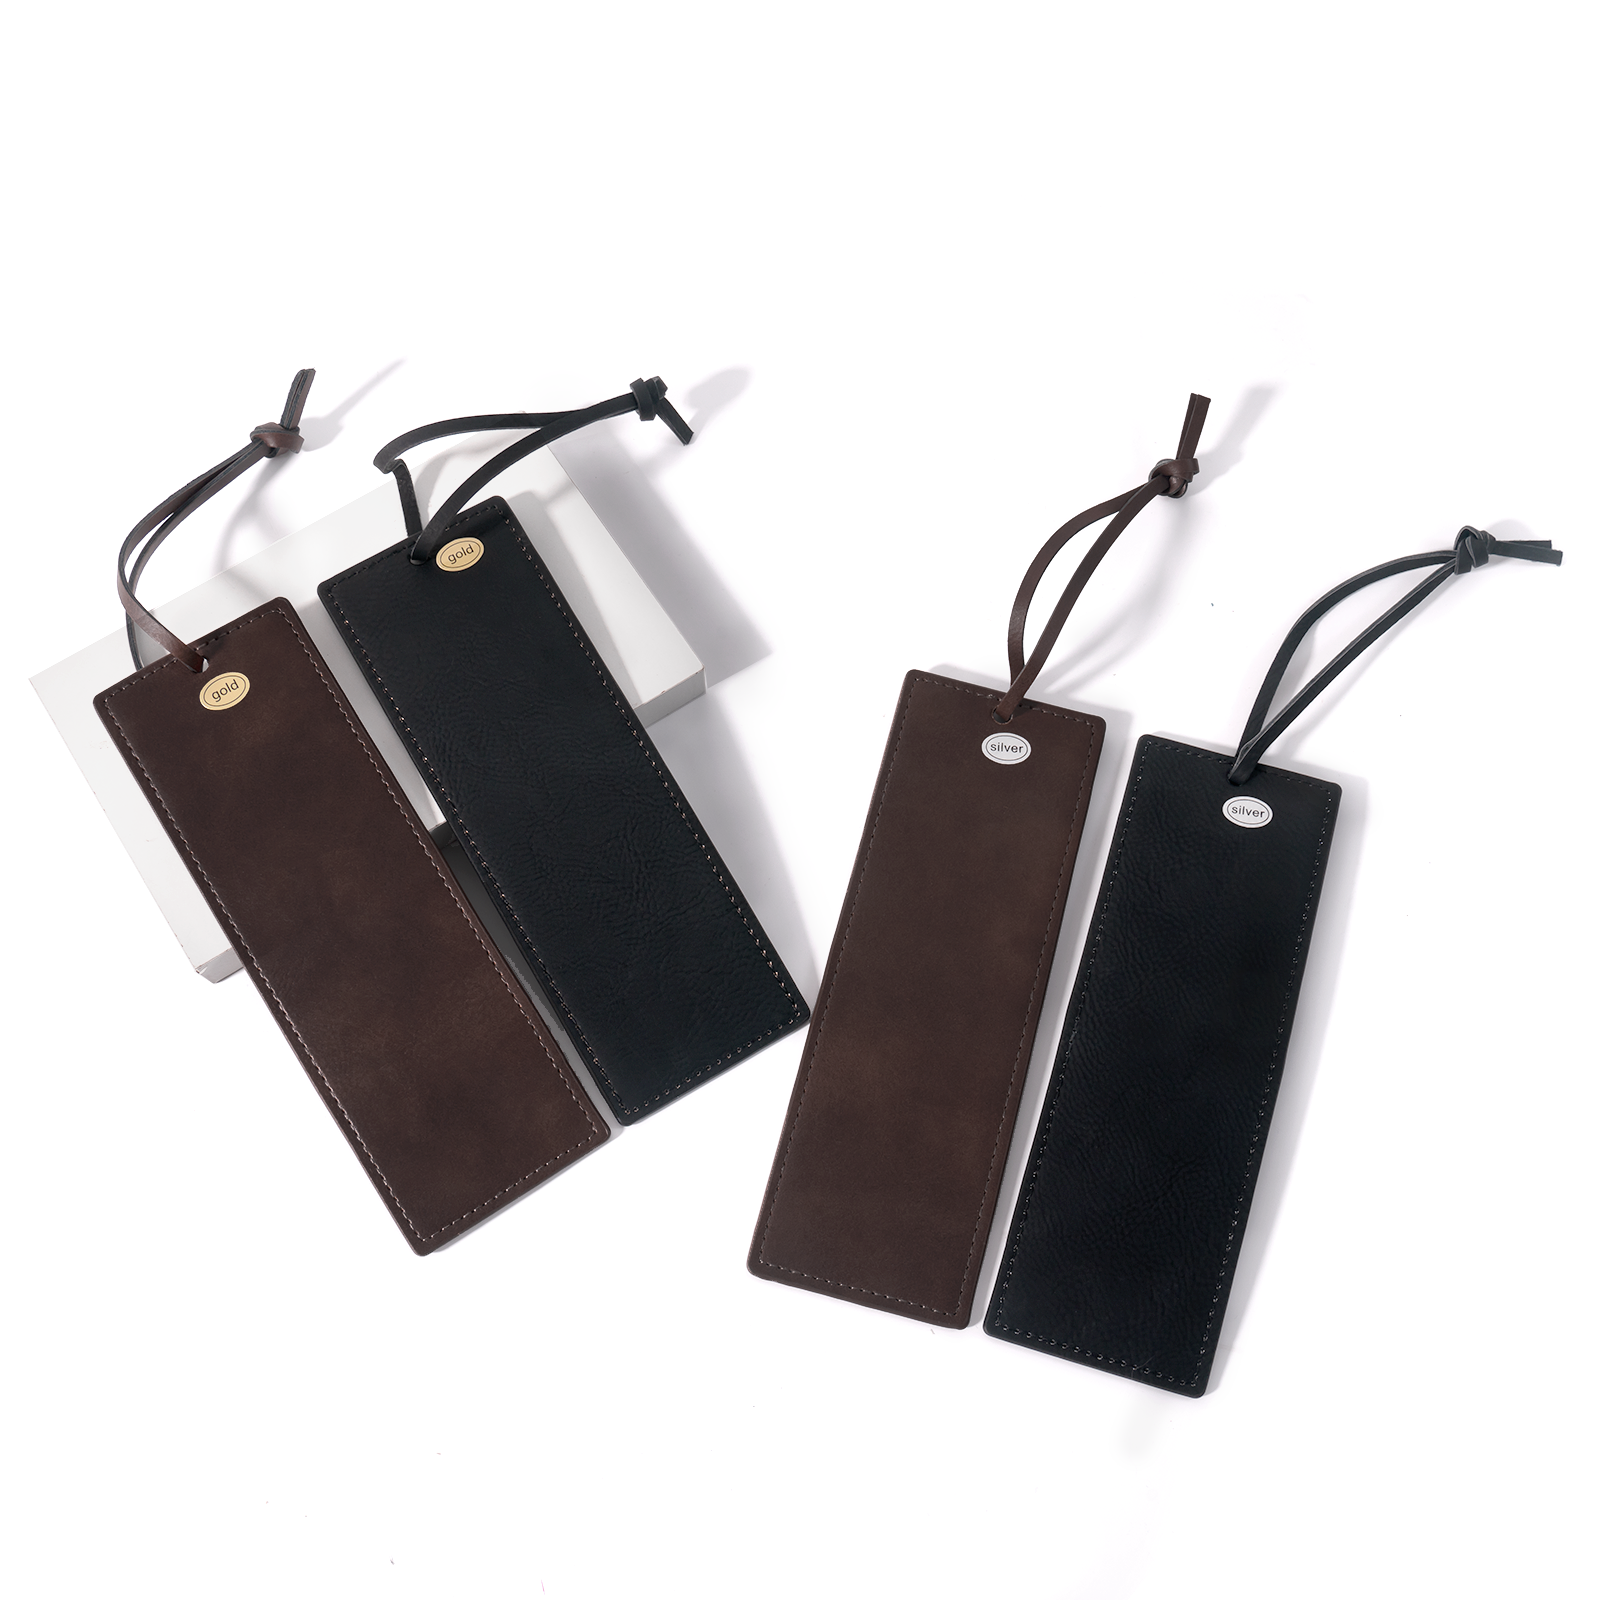 Laserable PU Patch Bookmarks Black&Brown (4pcs)